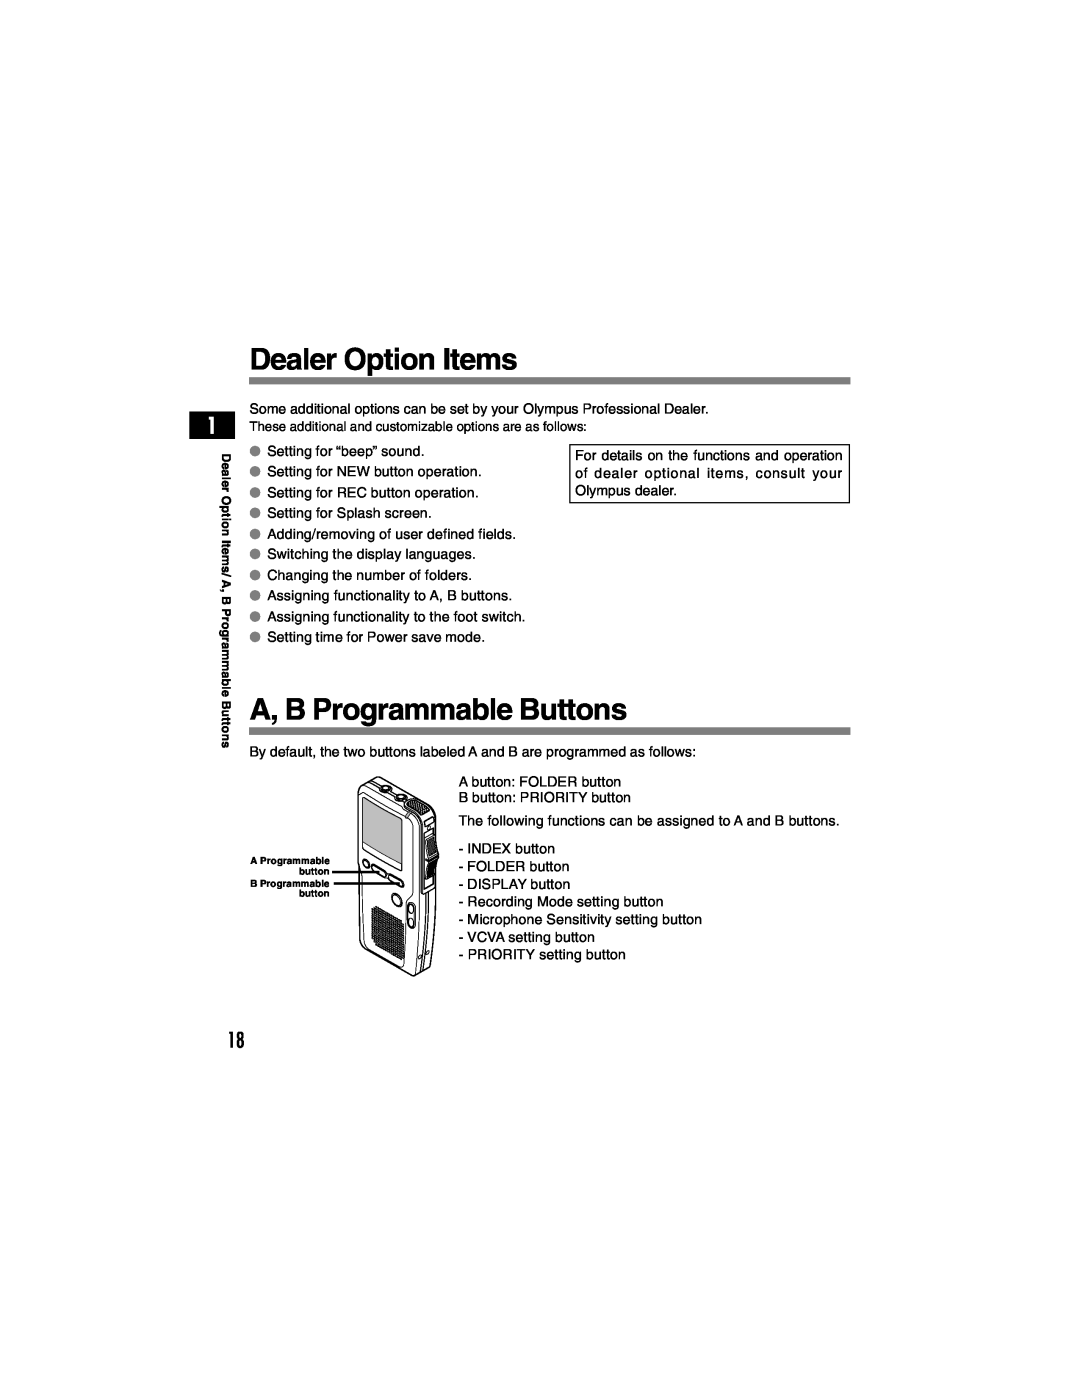 Olympus DS-4000 manual Dealer Option Items, A, B Programmable Buttons 